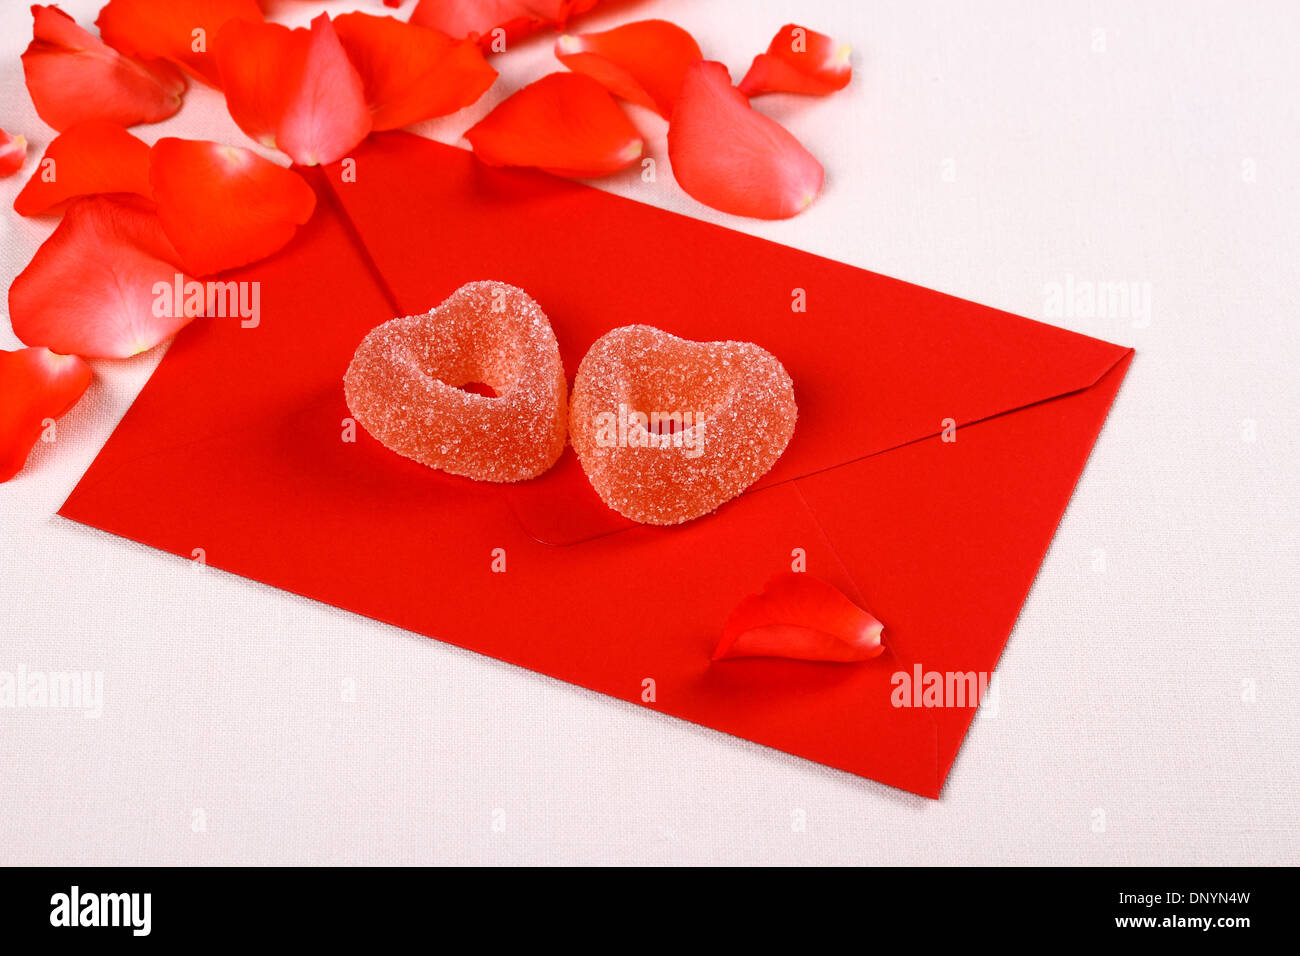 Two hearts from sugar candies on red envelope and petals, close up Stock Photo